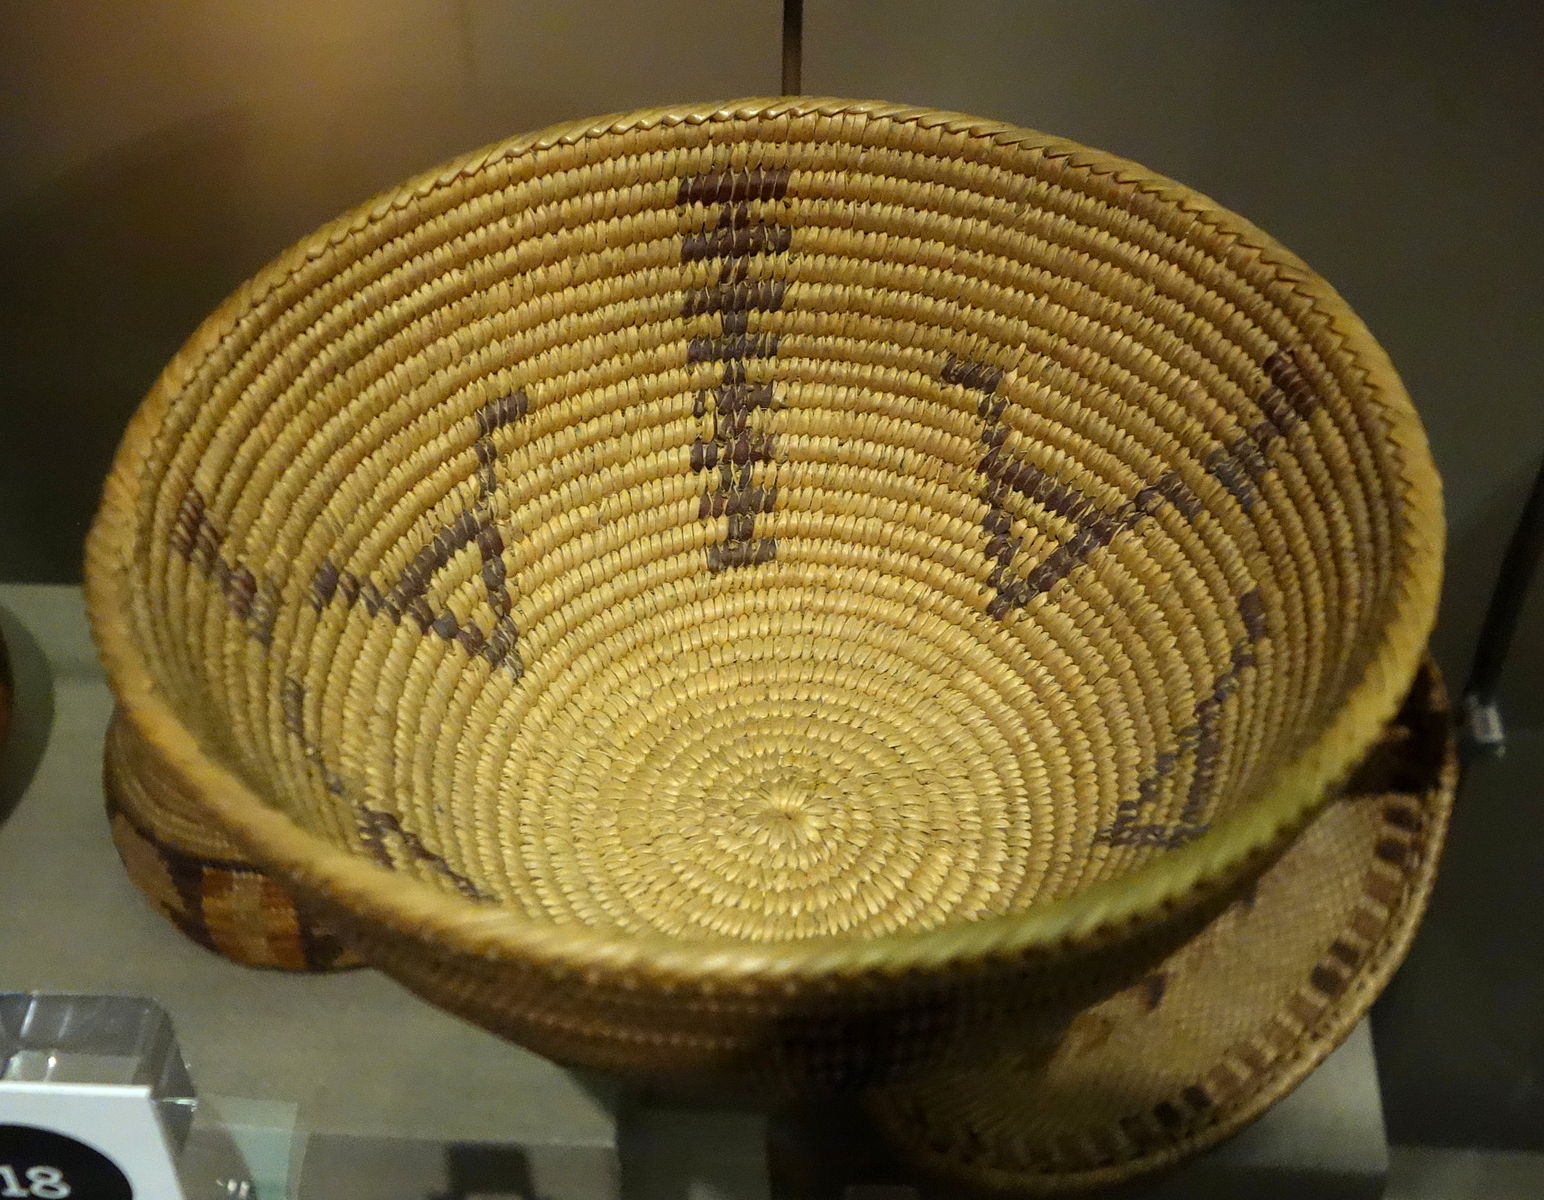 Miwok basket woven in two colors with a few geometric shapes